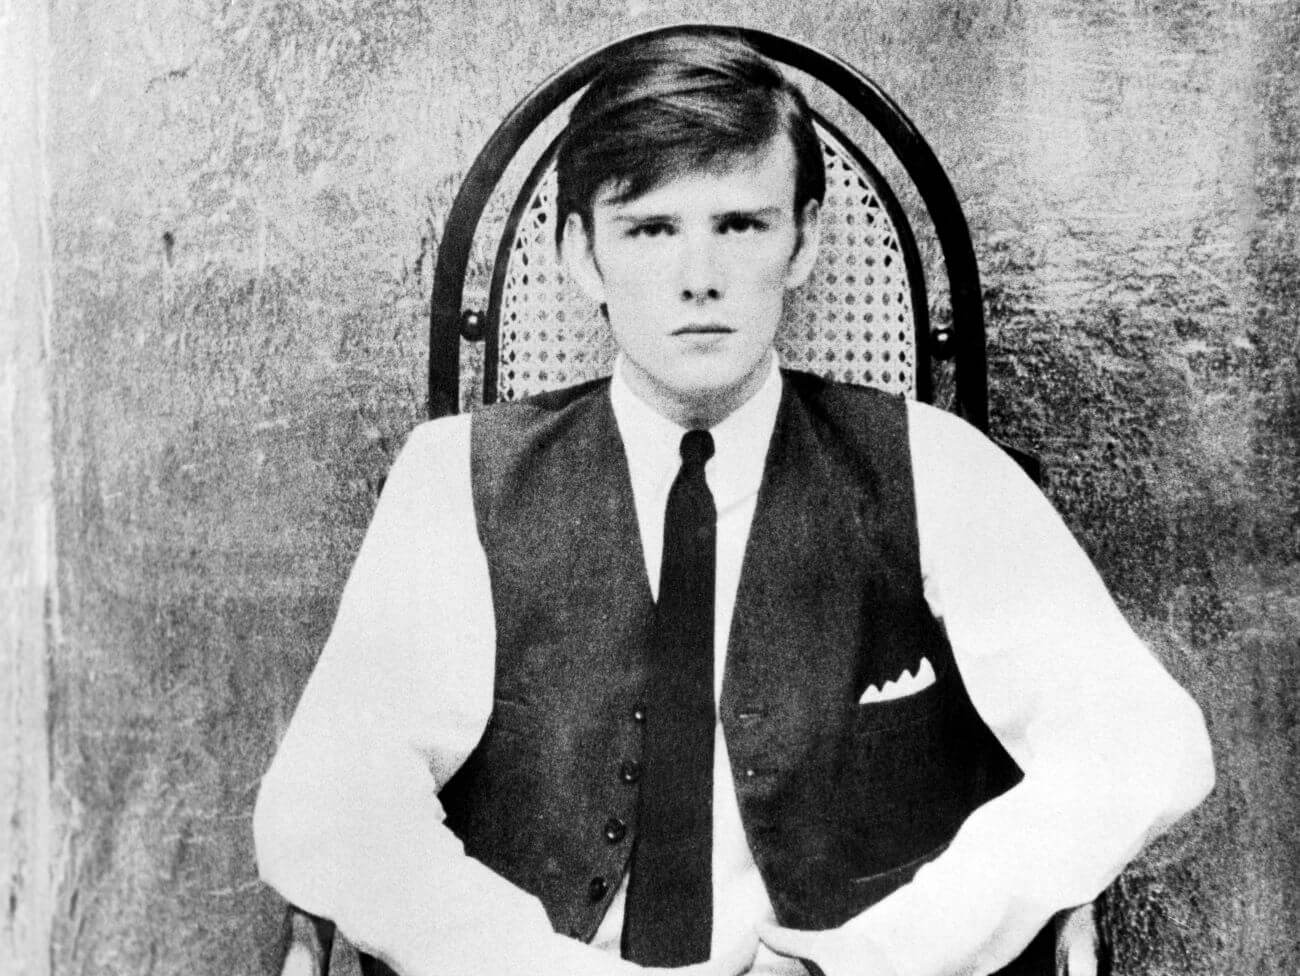 A black and white picture of Stuart Sutcliffe wearing a vest and tie and sitting in a chair.